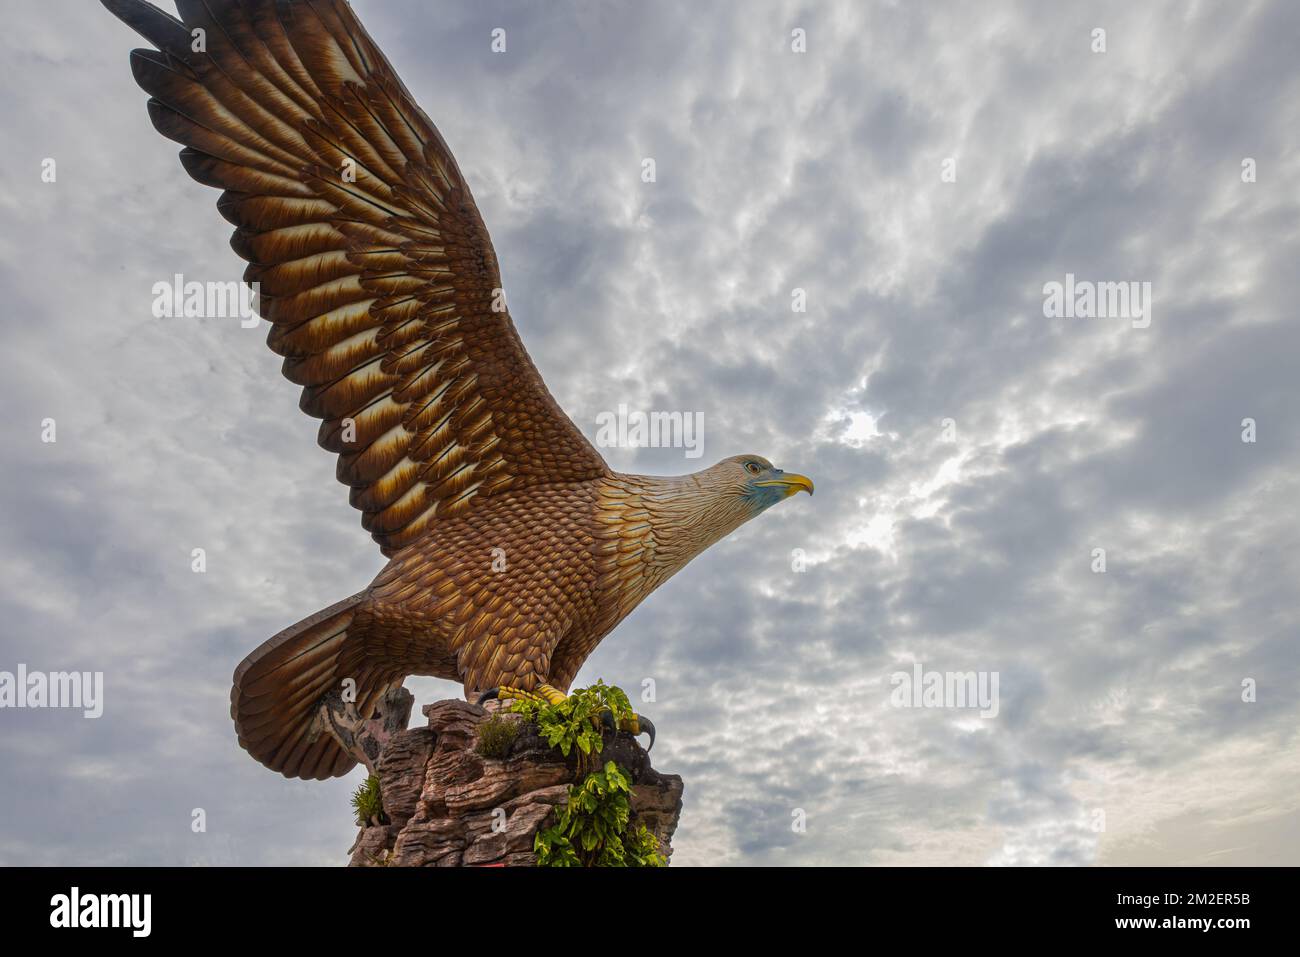 Langkawi, Malaysia - December 12, 2022: The Eagle of Langkawi. Landmark of the Malaysian Island. Huge statue of an eagle at the Eagle Square near the Stock Photo